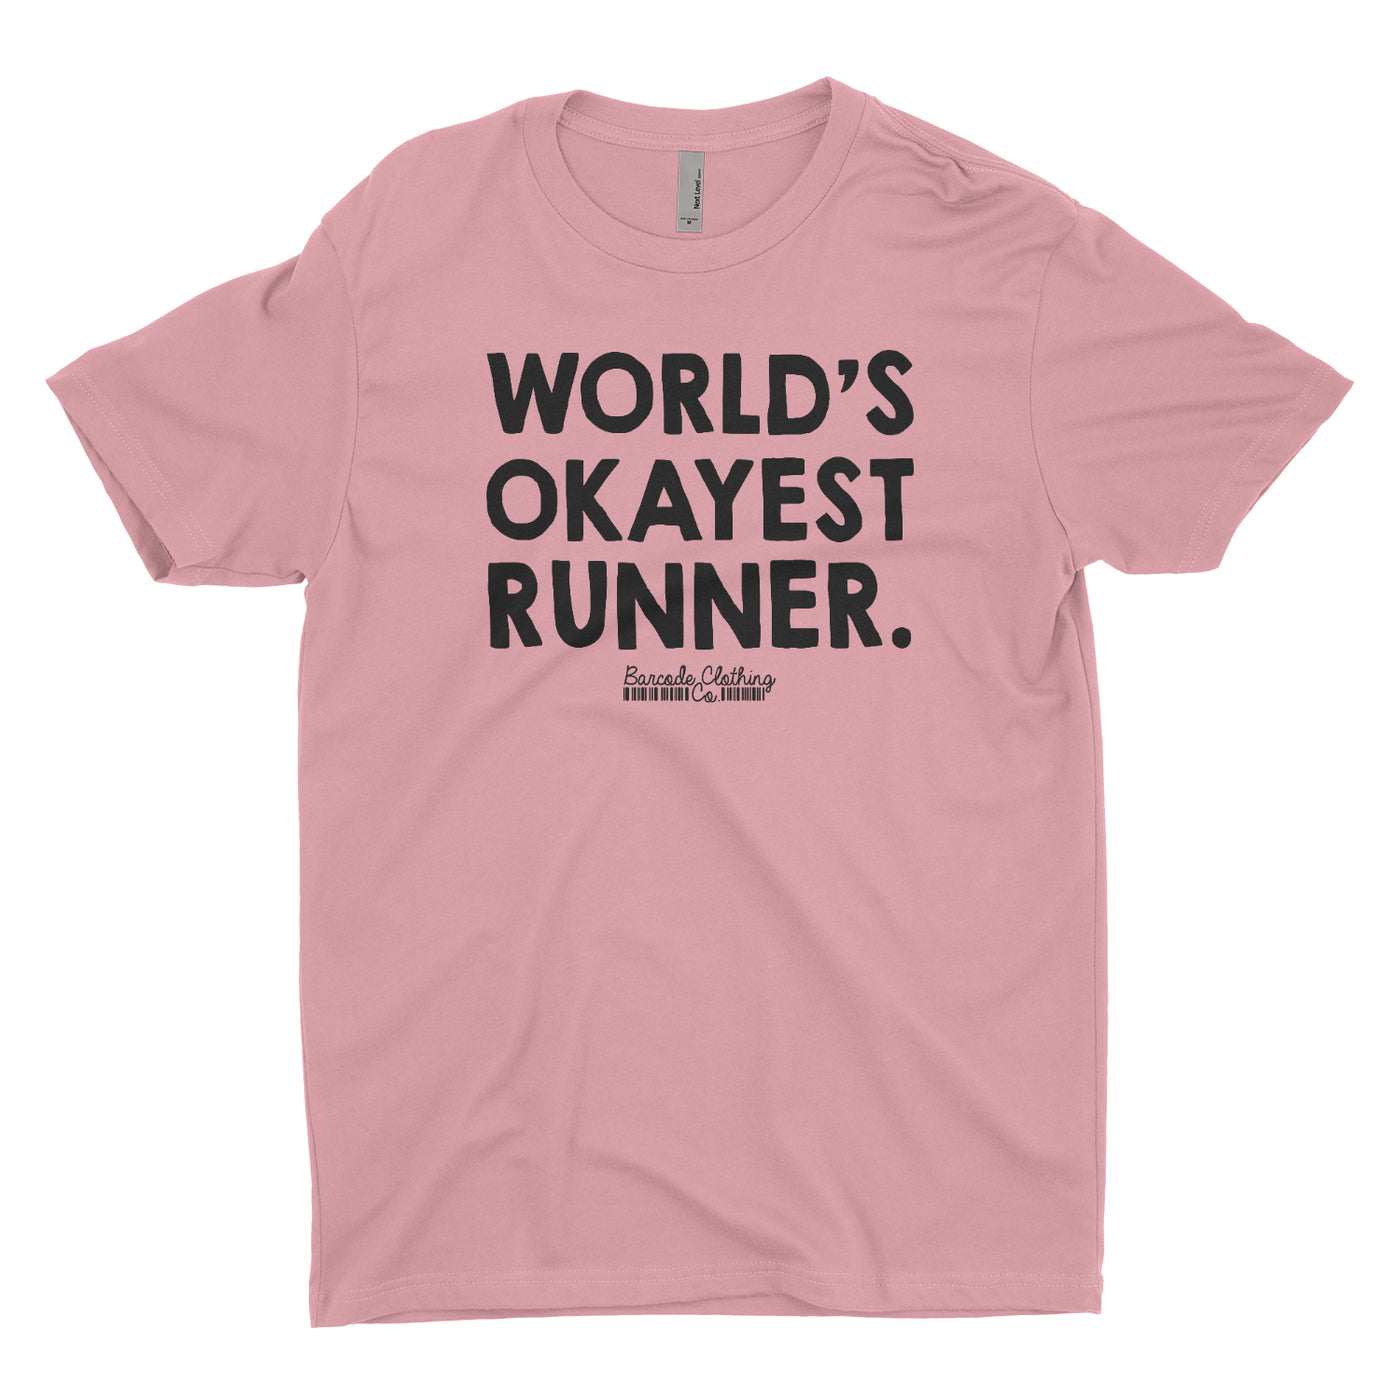 World's Okayest Runner Blacked Out